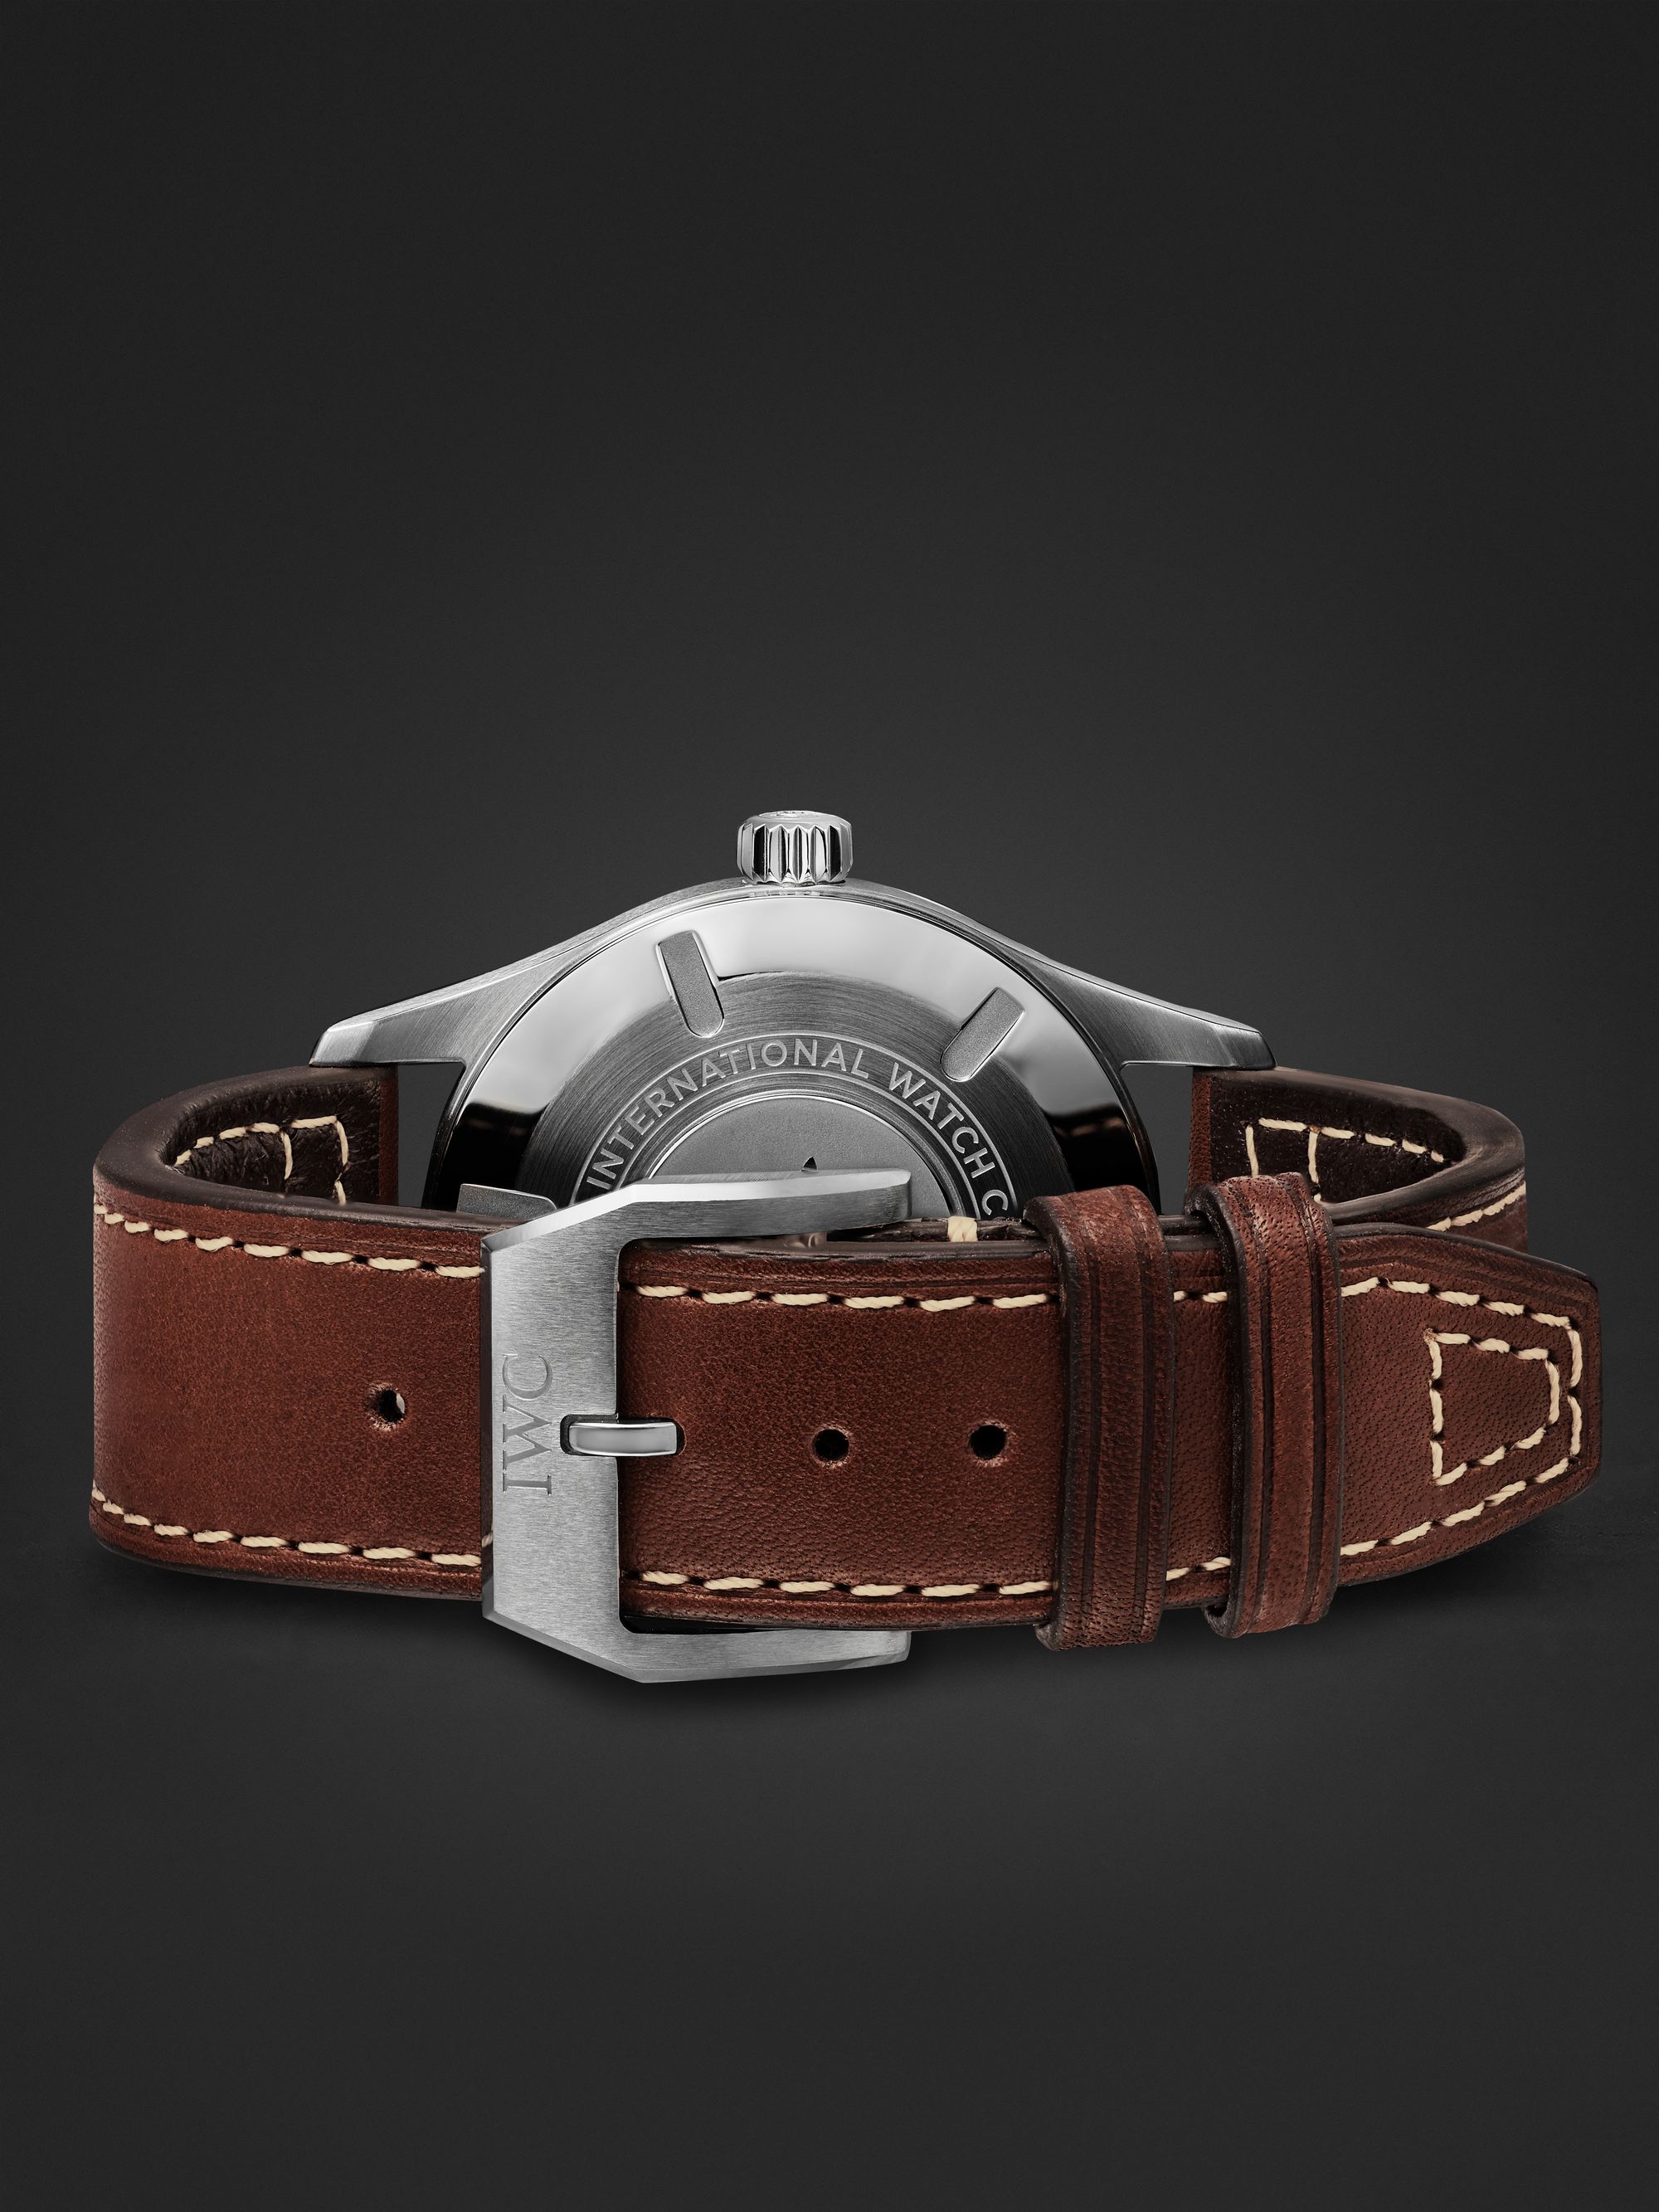 IWC SCHAFFHAUSEN Pilot's Spitfire Automatic 39mm Stainless Steel and Leather Watch, Ref. No. IW326803